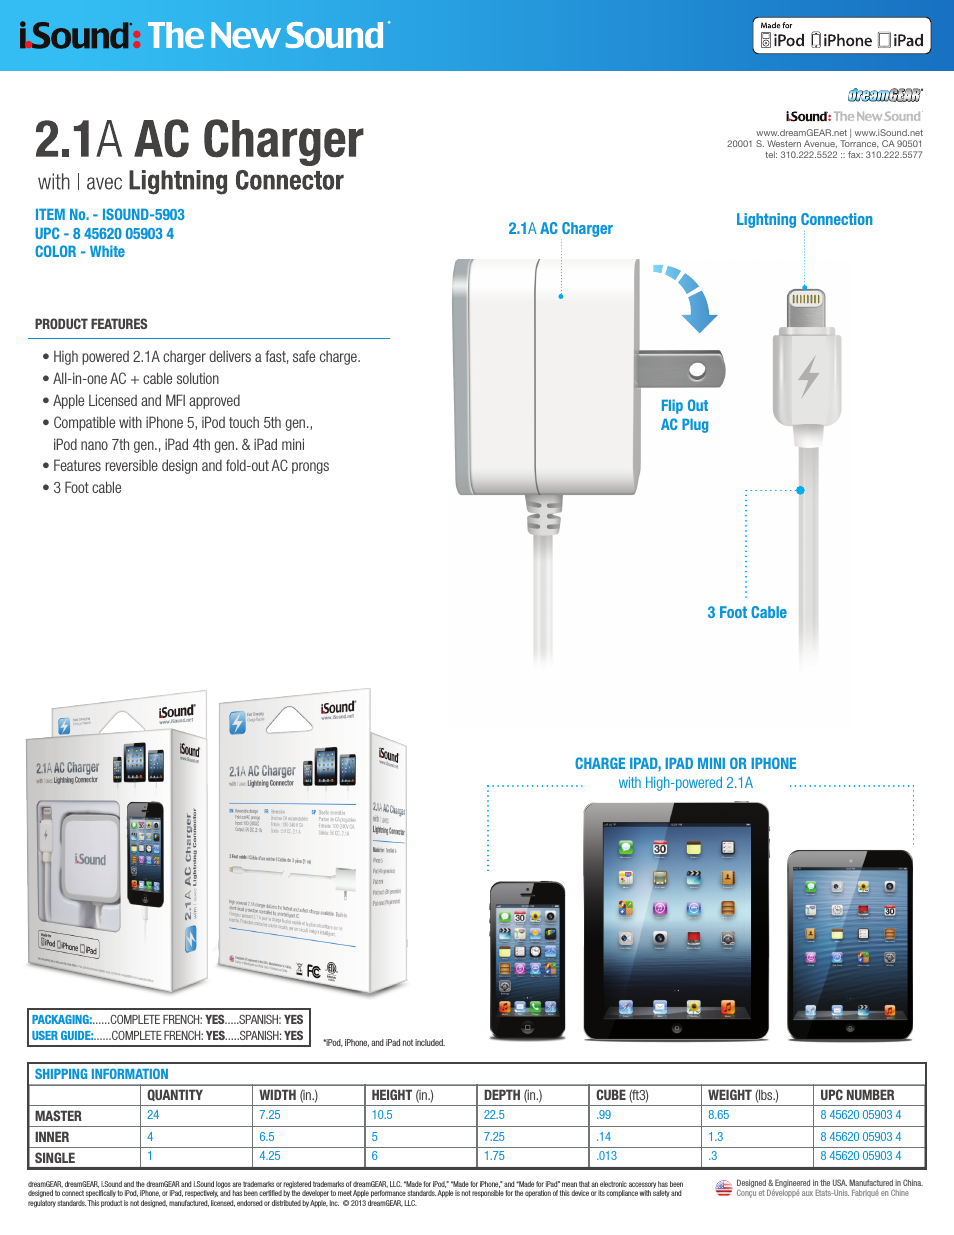 2.1A AC Charger with Lightning Connector - Sell Sheet